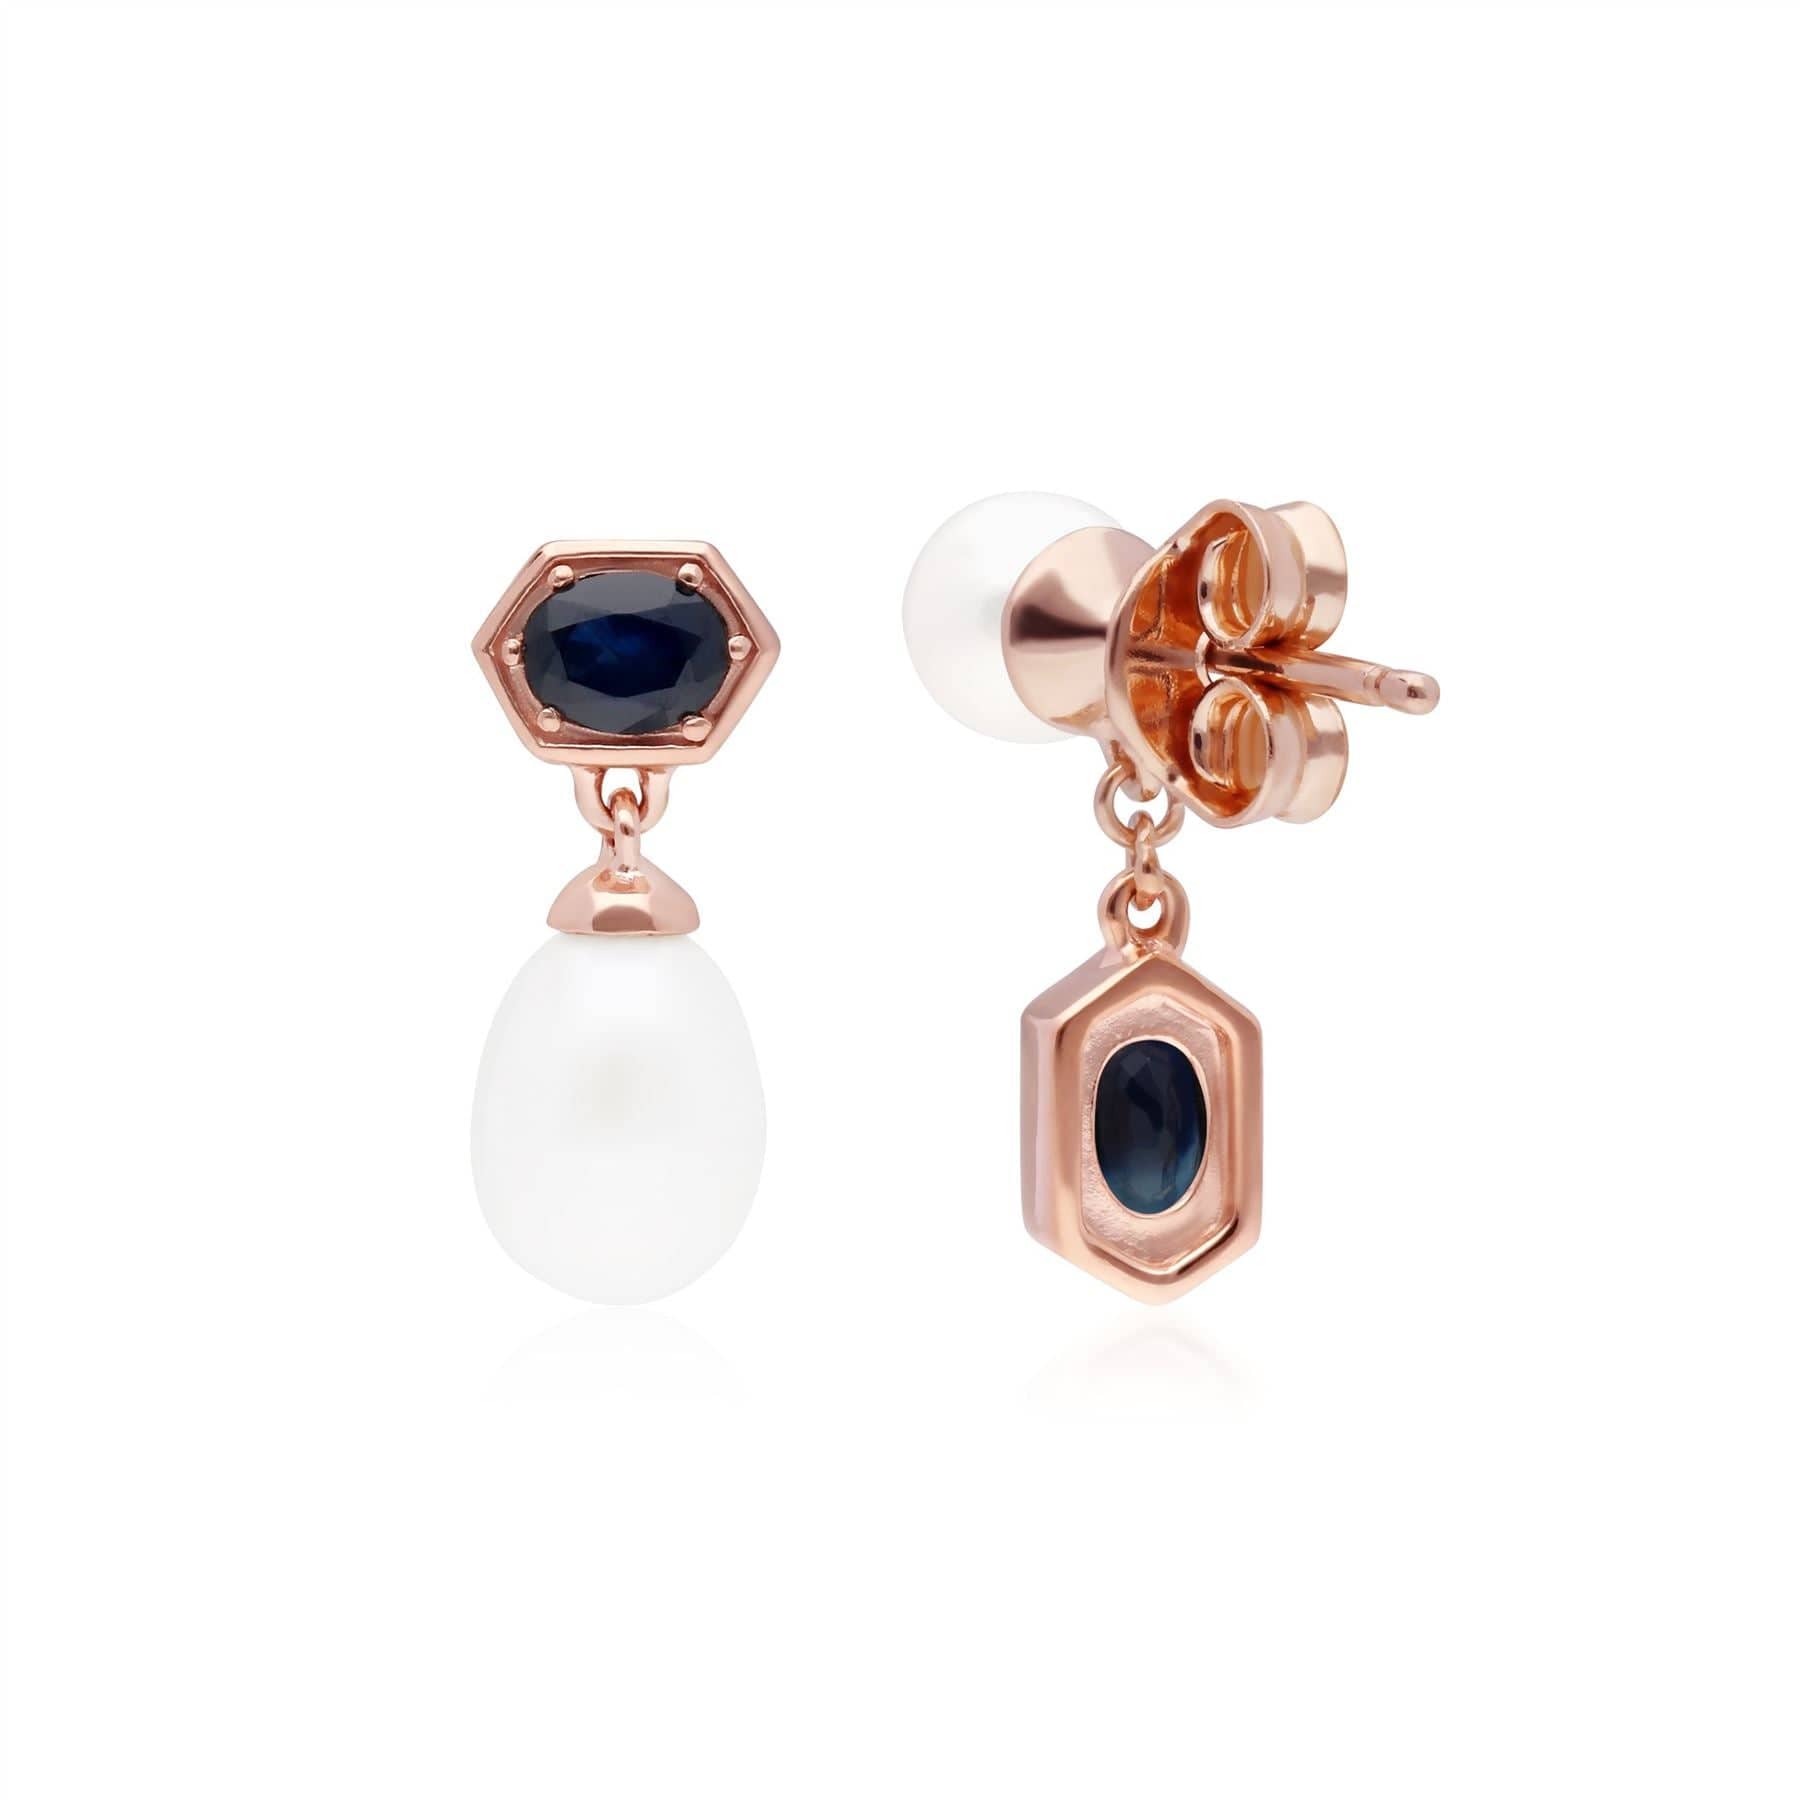 Modern Pearl & Sapphire Mismatched Drop Earrings in Rose Gold Plated Sterling Silver Back